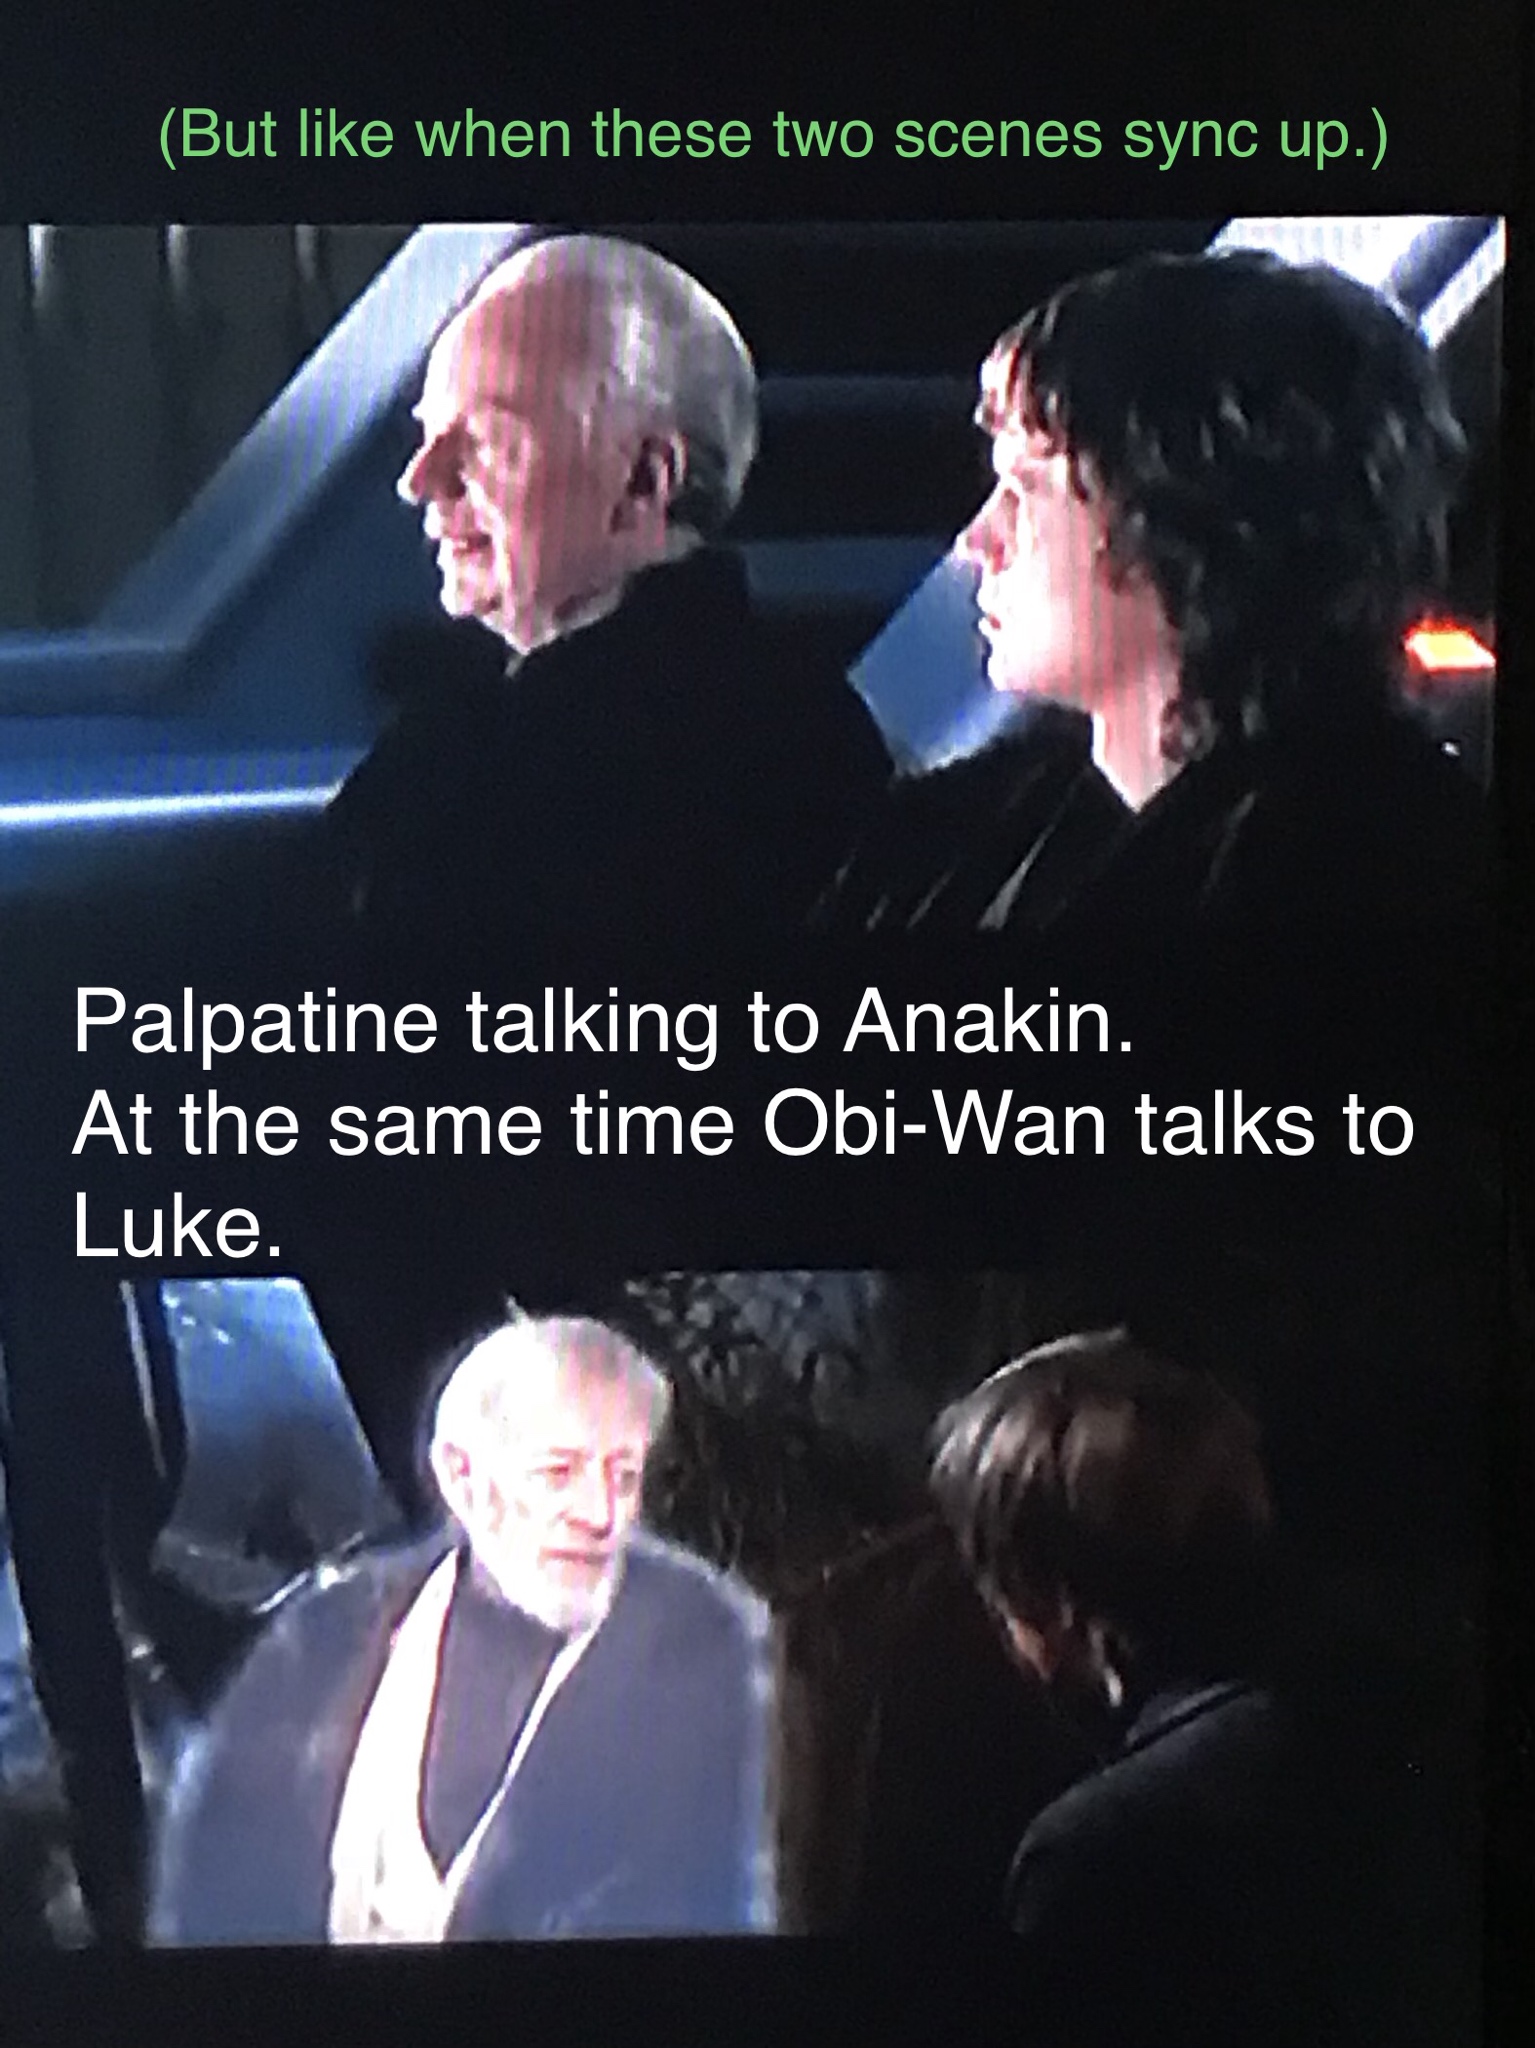 photo caption - But when these two scenes sync up. Palpatine talking to Anakin. At the same time ObiWan talks to Luke.